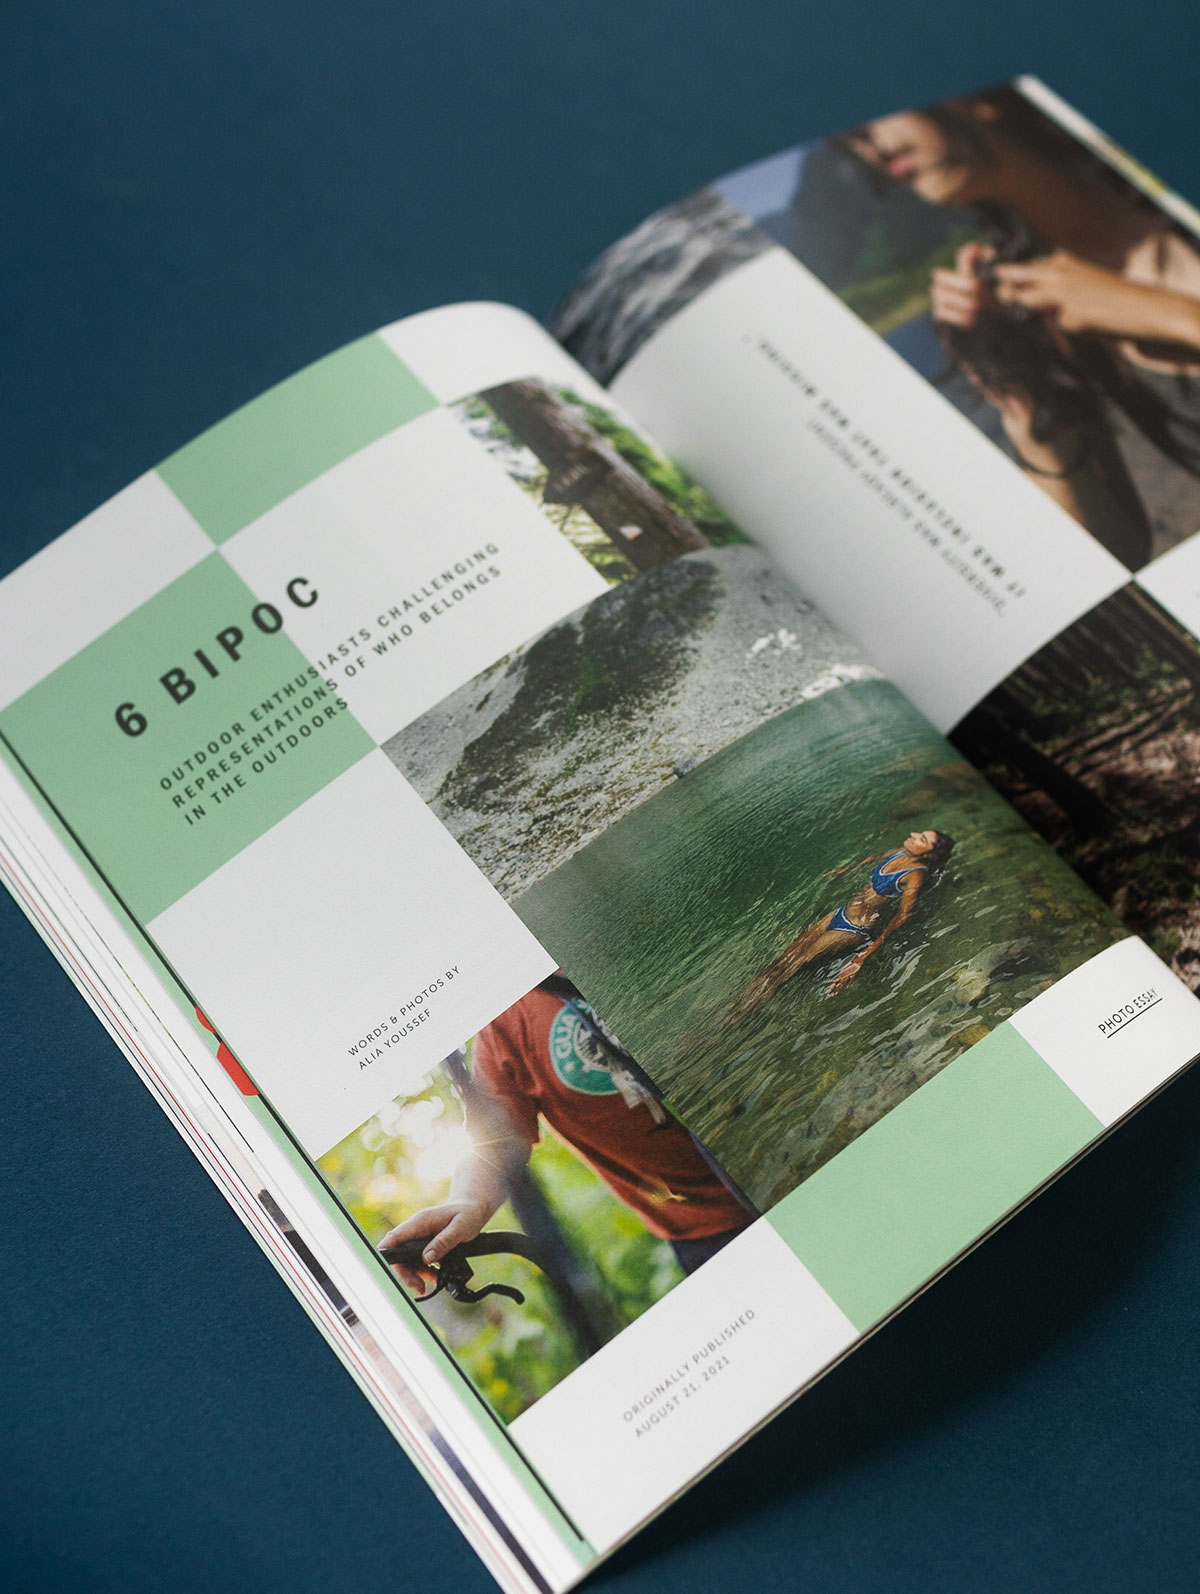 Six BIPOC Outdoor Enthusiasts challenging representation of who belongs in the Outdoors, words and photos by Alia Youssef - 'Diversity was already present. It was inclusion that was missing', Title Page Design, The Narwhal Print Magazine Issue Four  | www.alicia-carvalho.com | www.alicia-carvalho.com